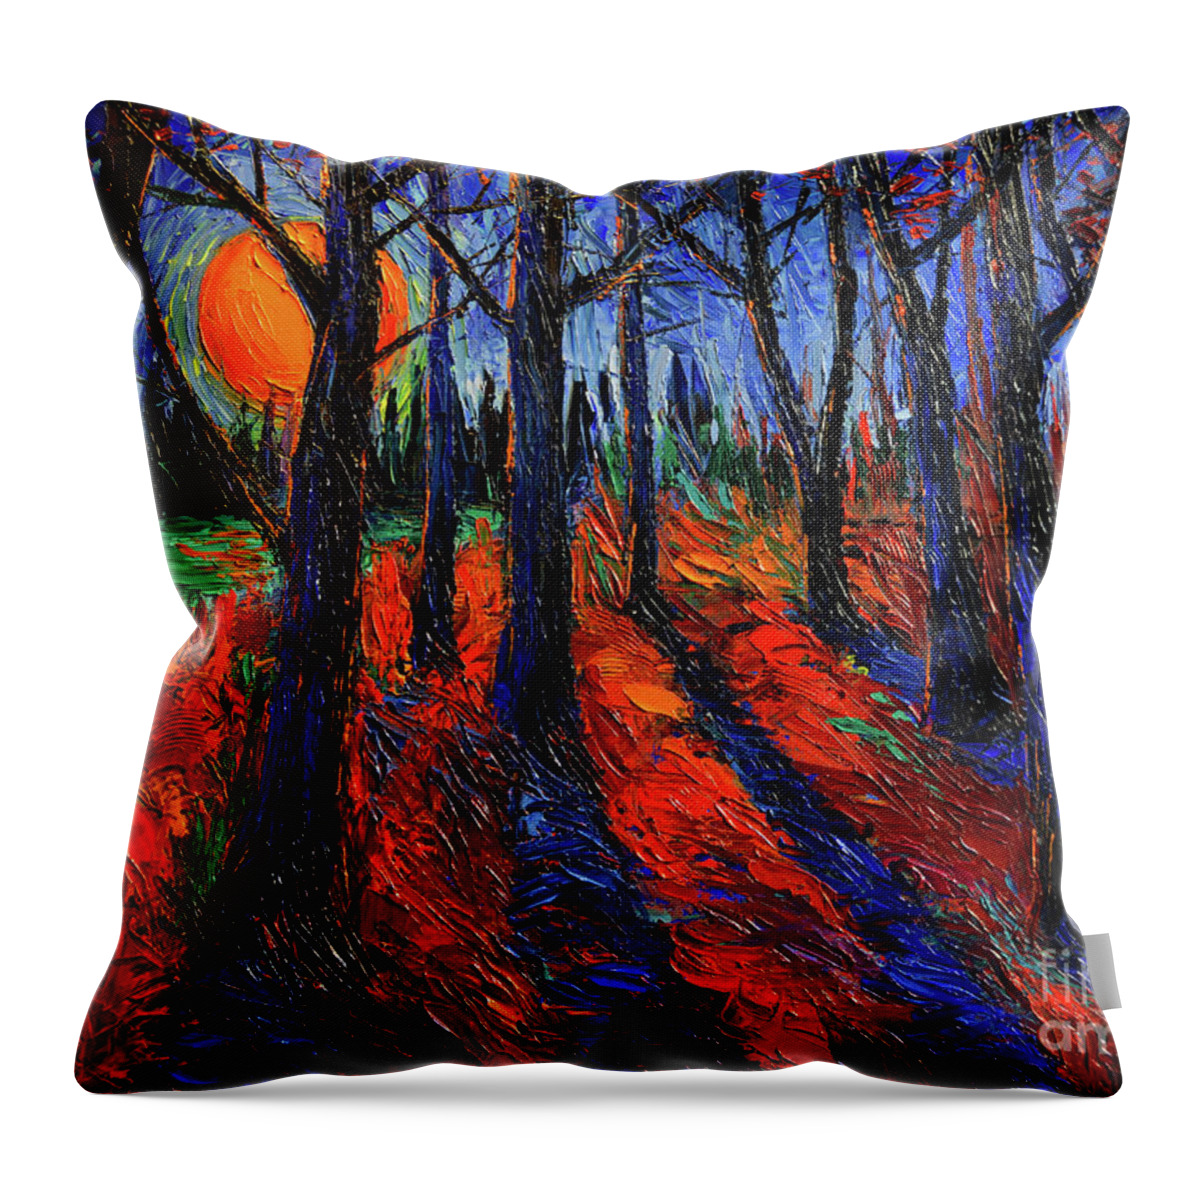 Midnight Sun Wood Throw Pillow featuring the painting MIDNIGHT SUN WOOD modern impressionist palette knife oil painting by Mona Edulesco by Mona Edulesco